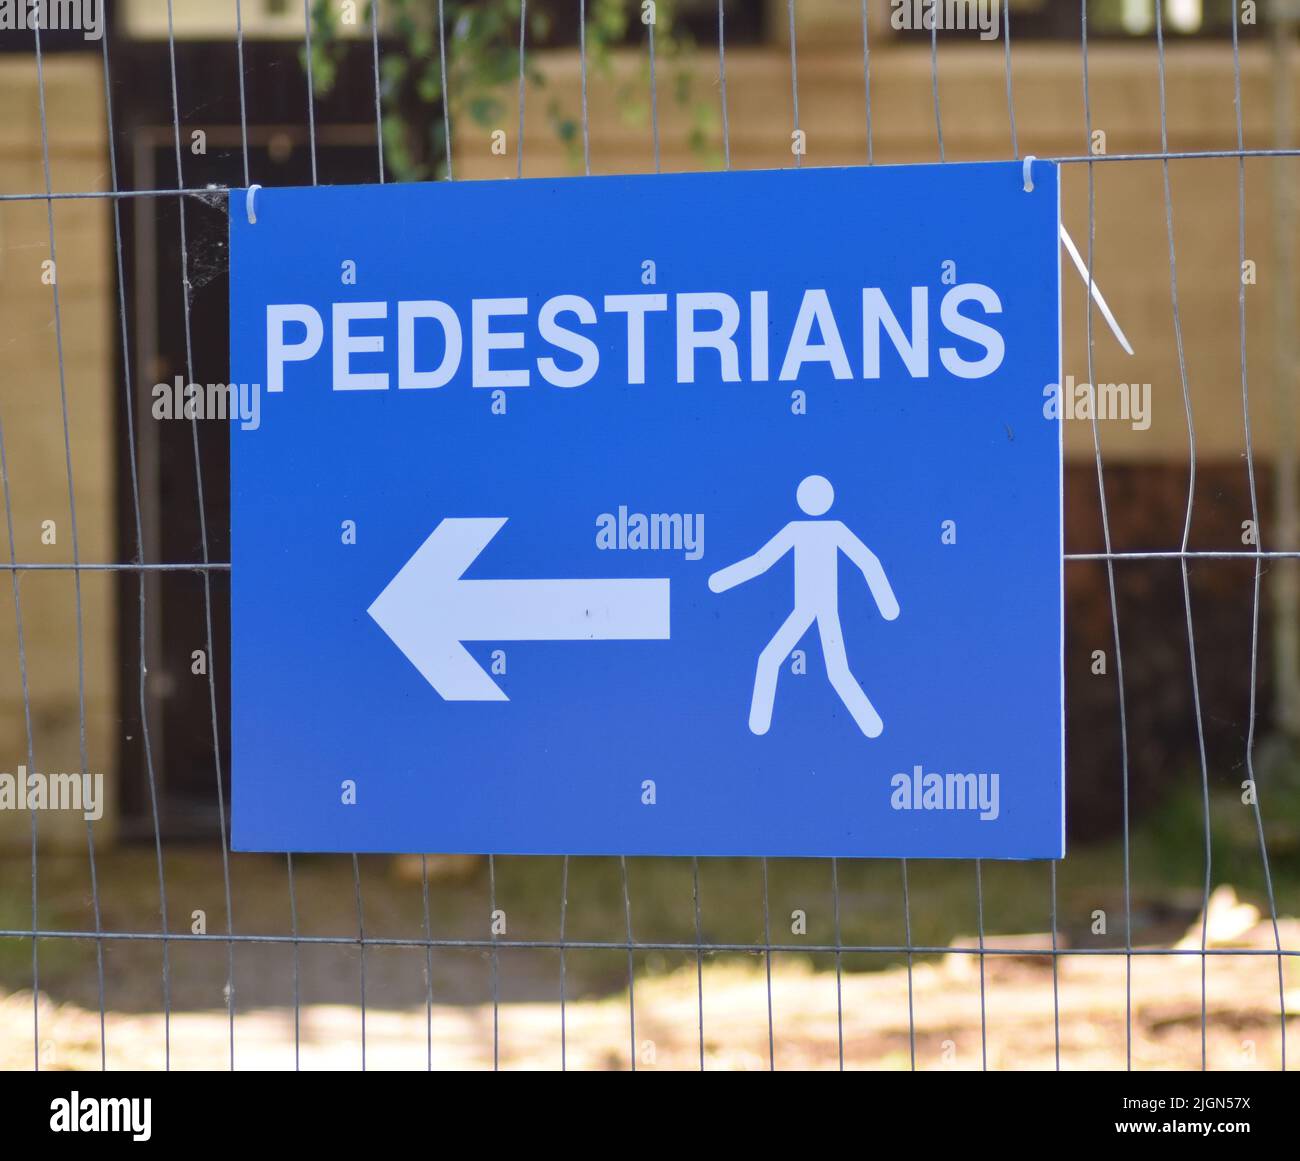 Sign on the fence at a building site showing the route for pedestrians. Stock Photo